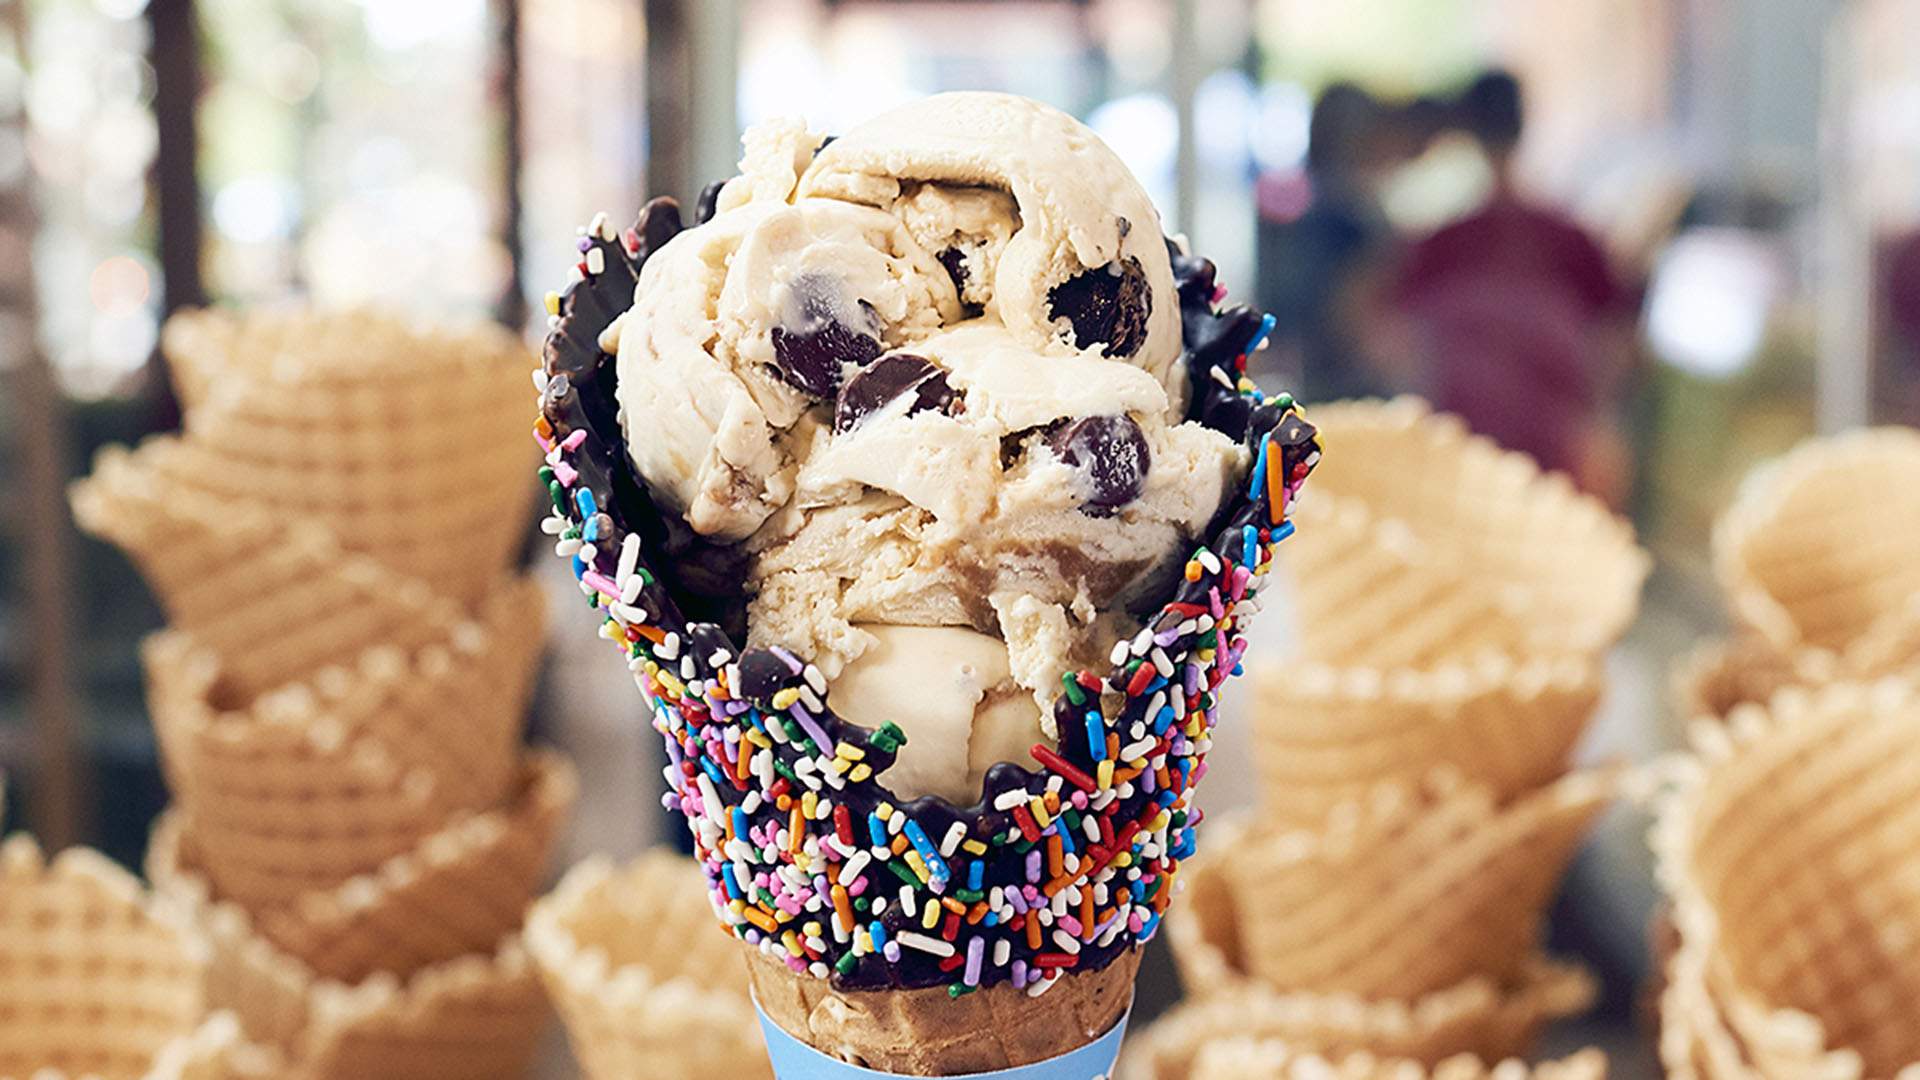 Ben & Jerry's Is Opening Its First Brisbane Scoop Shop and Giving Out Free Ice Cream to Celebrate